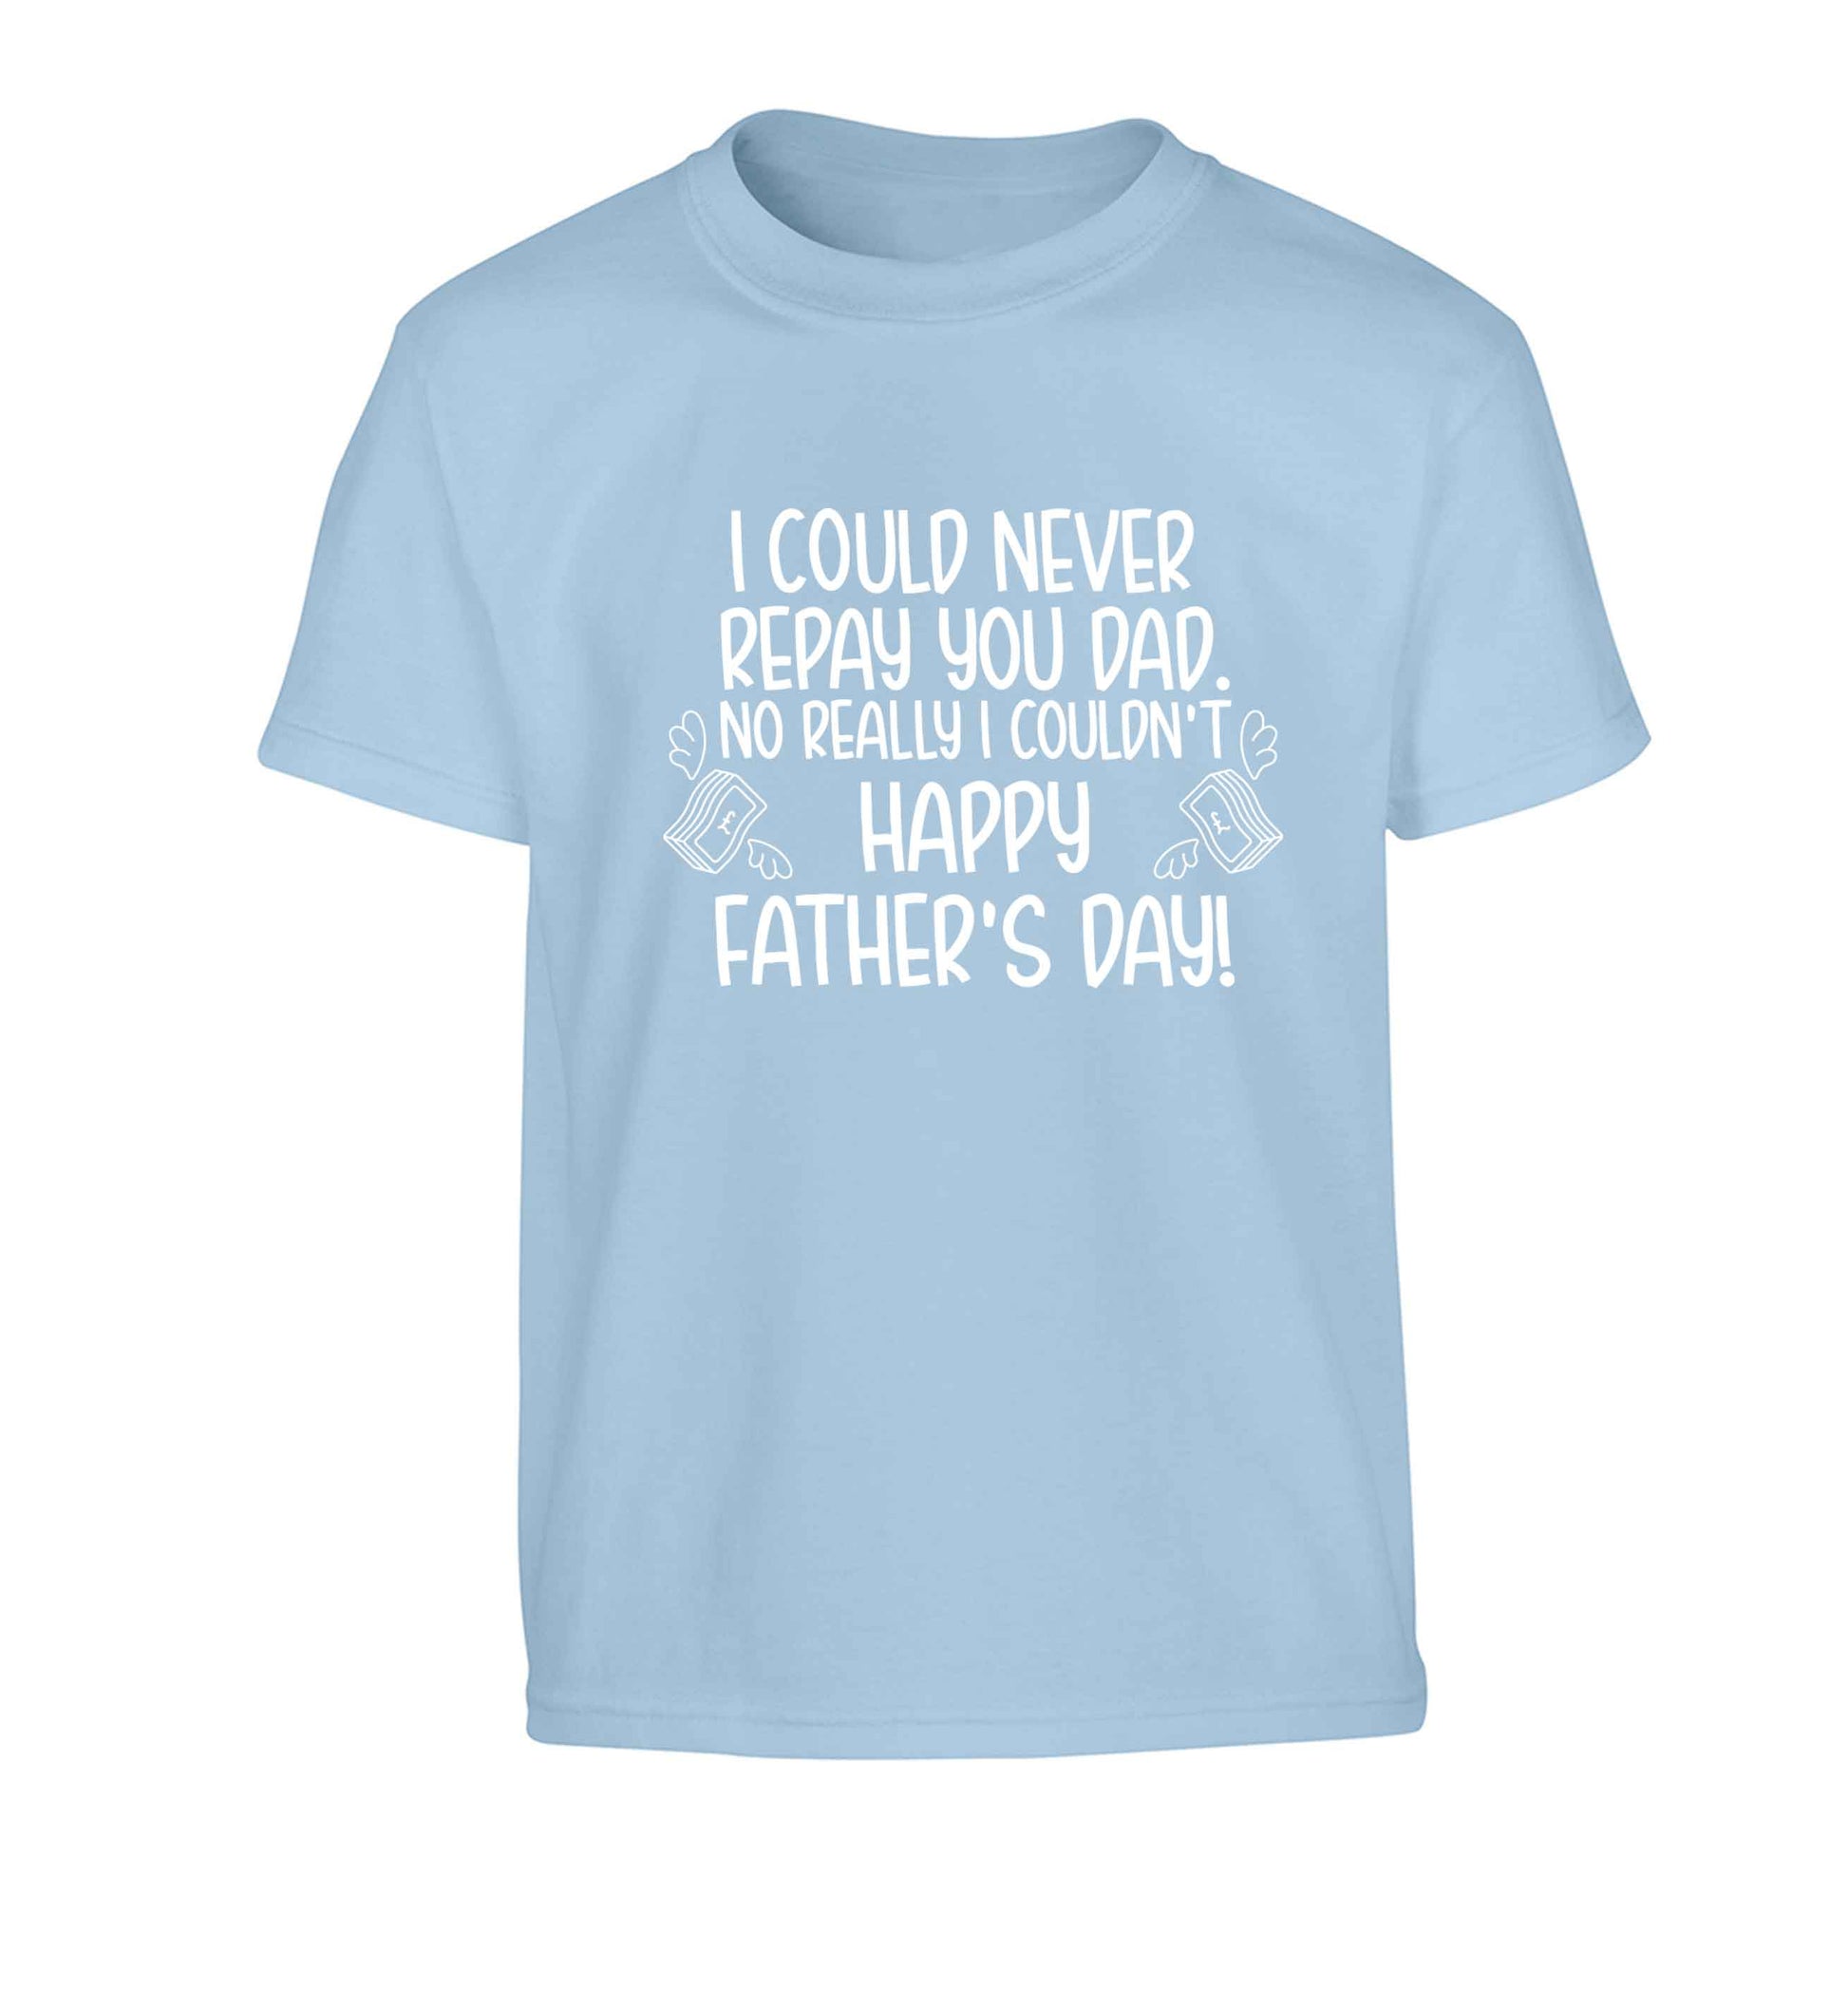 I could never repay you dad. No I really couldn't happy Father's day! Children's light blue Tshirt 12-13 Years